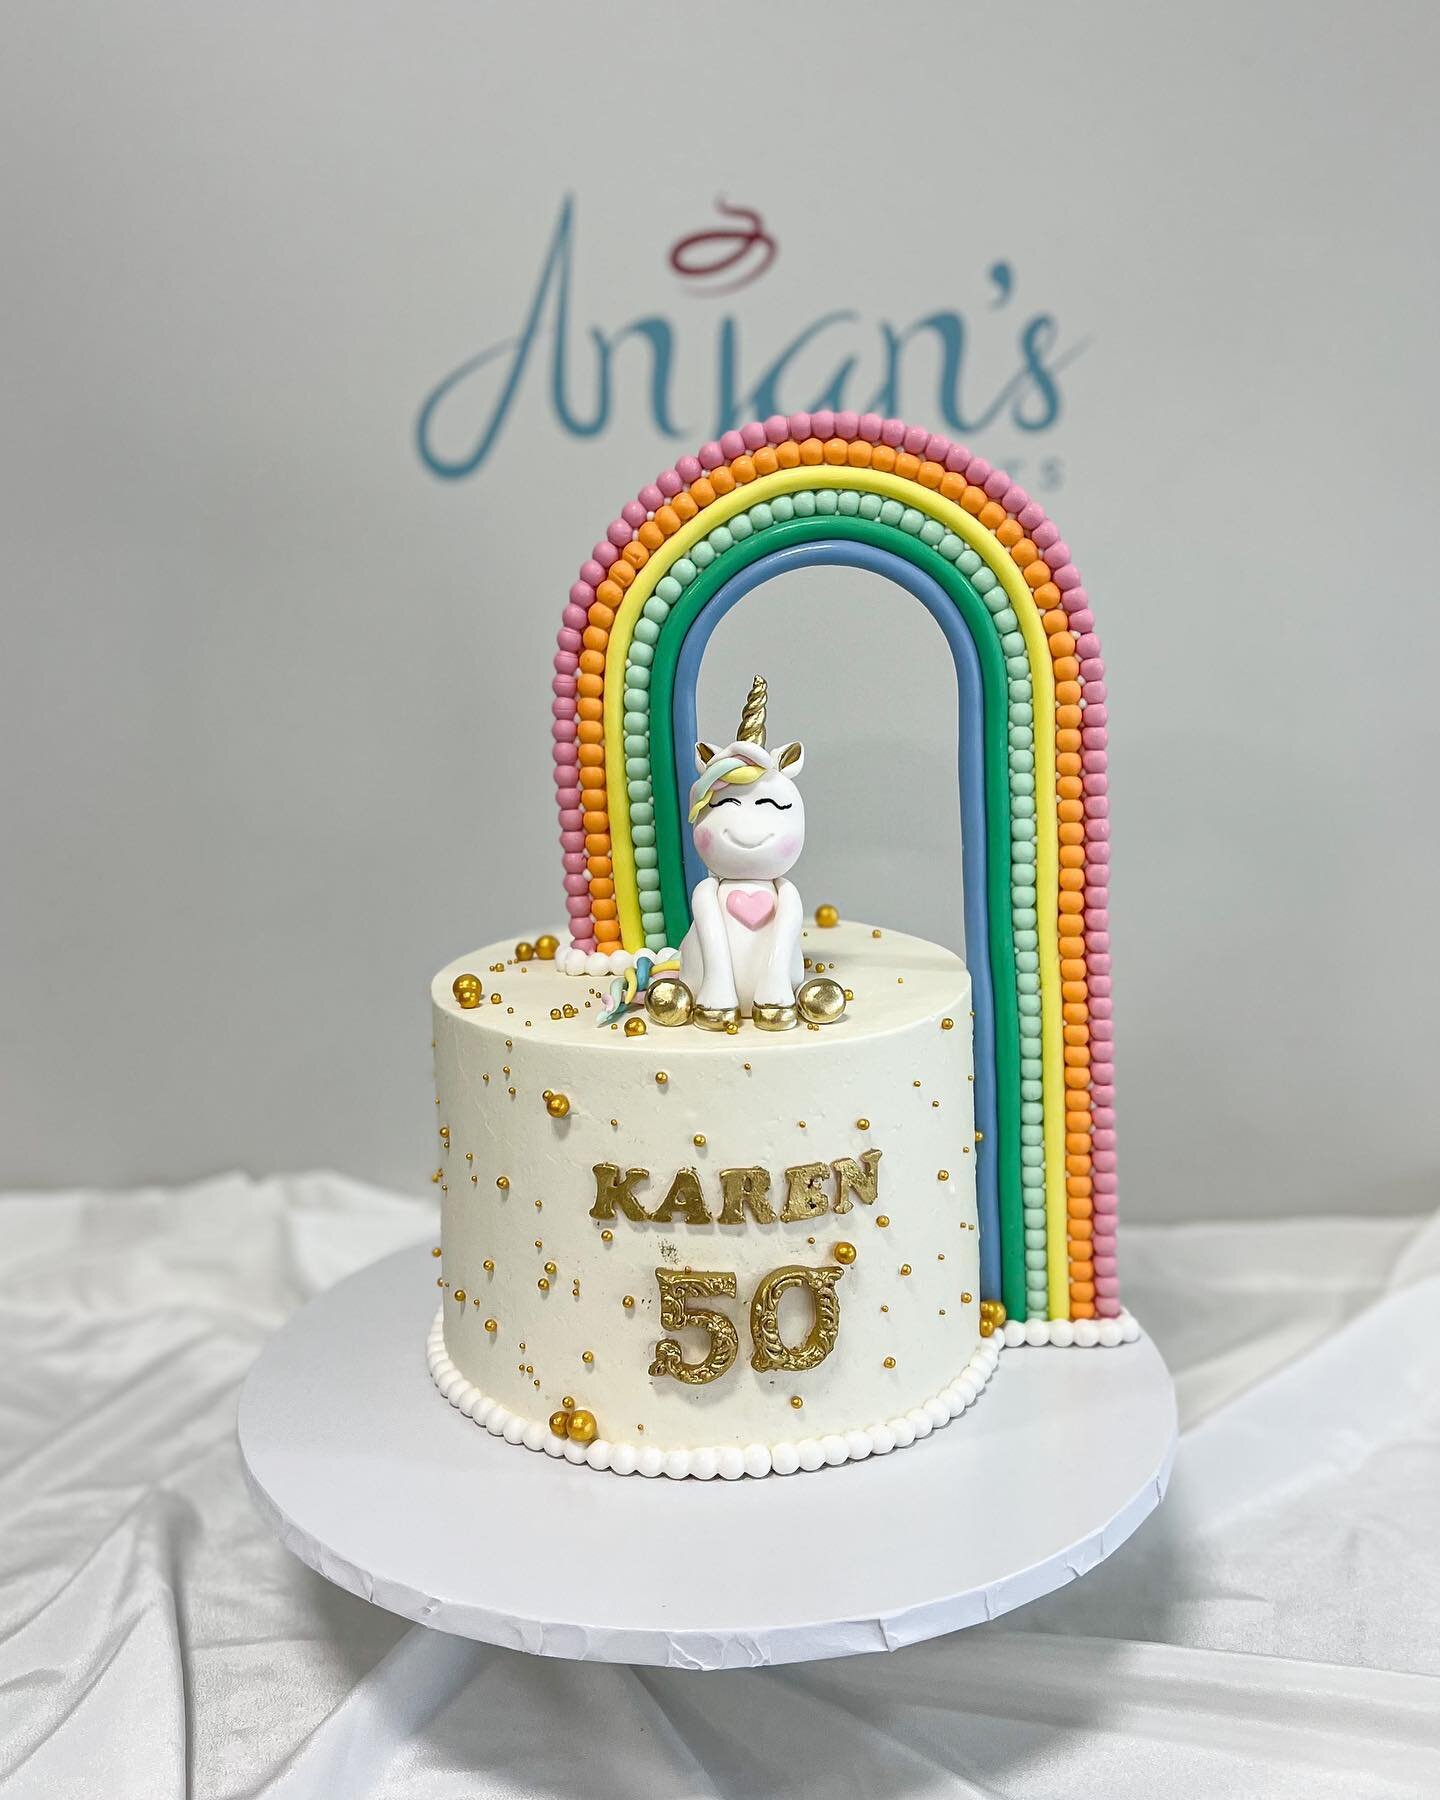 Happy Friday to our lovely Insta Family! We have so much fun in the Bakeshop while making themed cakes. My favourite is Unicorn. What&rsquo;s your favourite theme? 🍰💕
*
*⁣⁣⁣⁣⁣
*⁣⁣⁣⁣⁣
#cakesbyanjan #anjansdelights #anjansbridalshowercakes #anjanswed